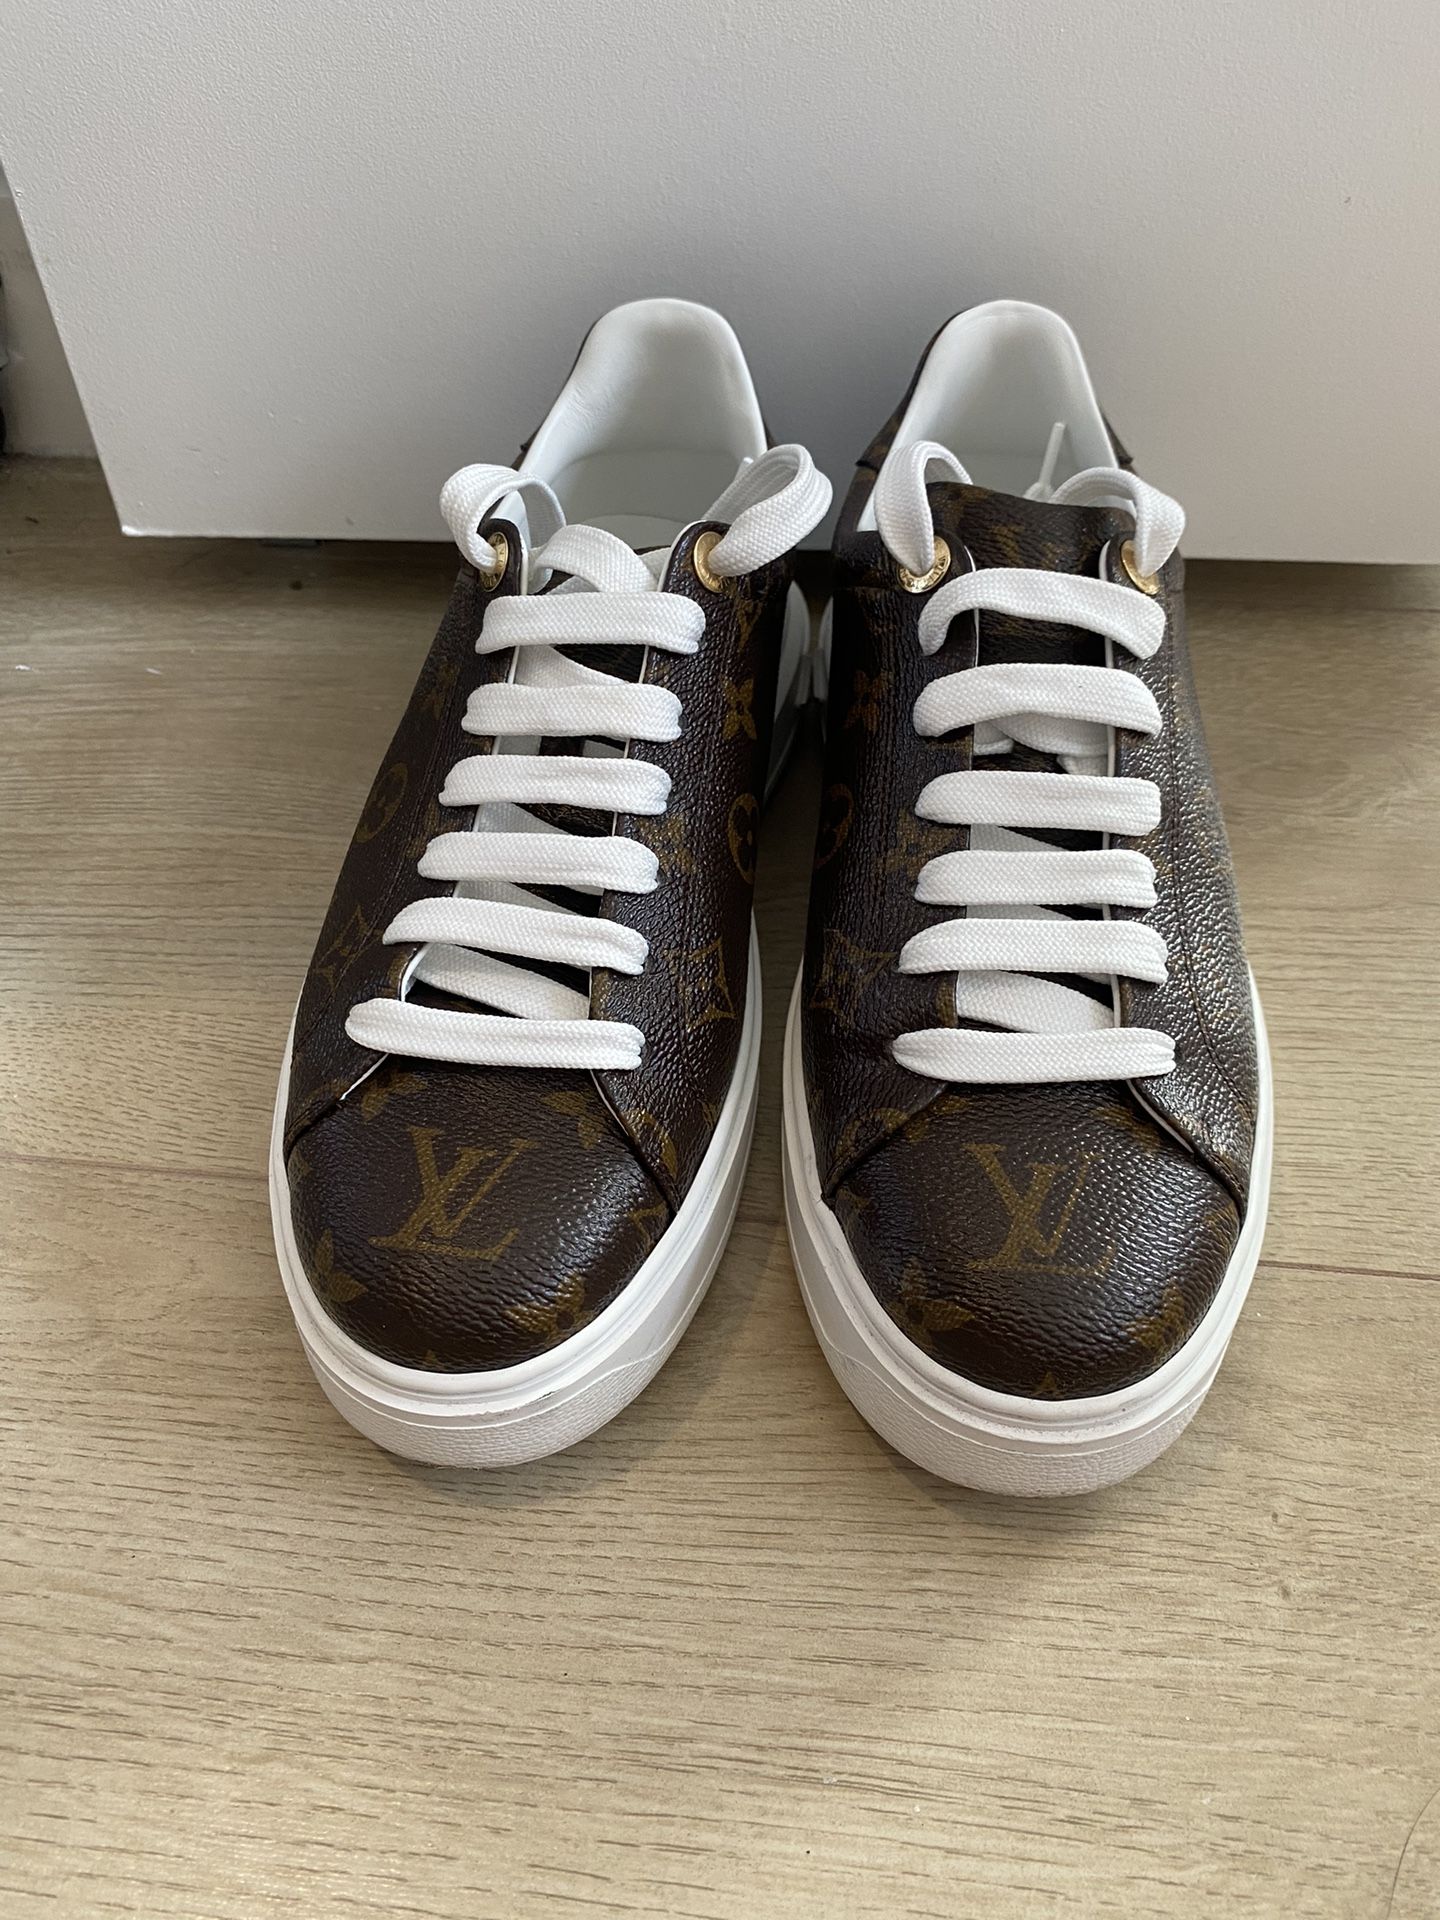 Forget Black Friday Discounts; Louis Vuitton Debuts Luxurious Sneaker Boxes  and New Sneaker Collabs at Design Miami